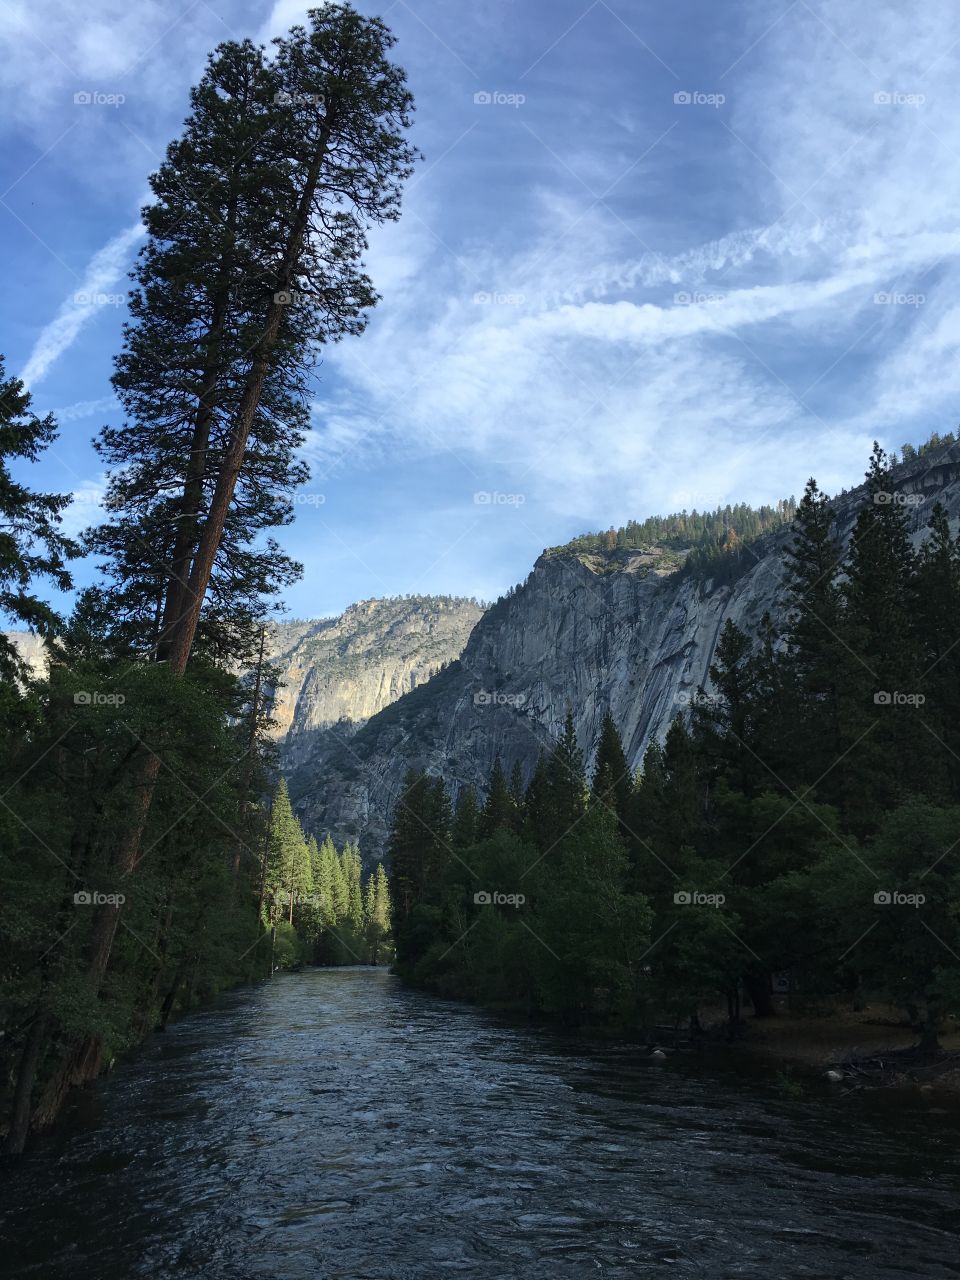 North pine campgrounds, Yosemite national park